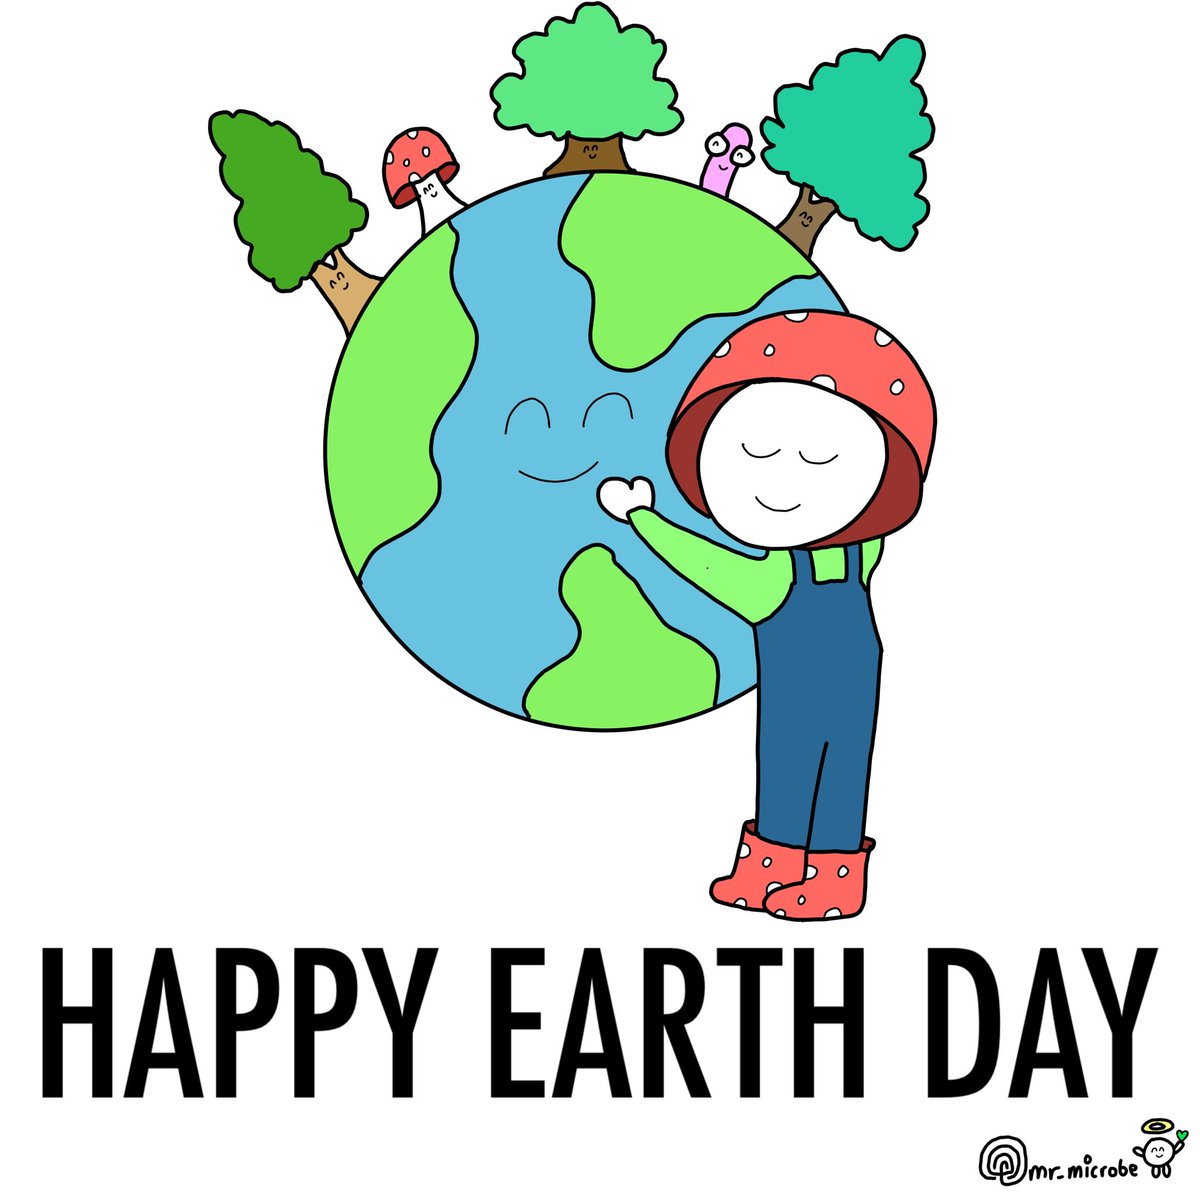 Daily art challenge day #568, happy earth day 🍄🧑‍🌾🌍

#knf #koreannaturalfarming #naturalfarming #farming #farm #plants #seeds #planting #soil #microbes #microorganisms #nature #microorganism #regenerativeagriculture #regenerativefarming #childrensbooks #childrensbookillustration